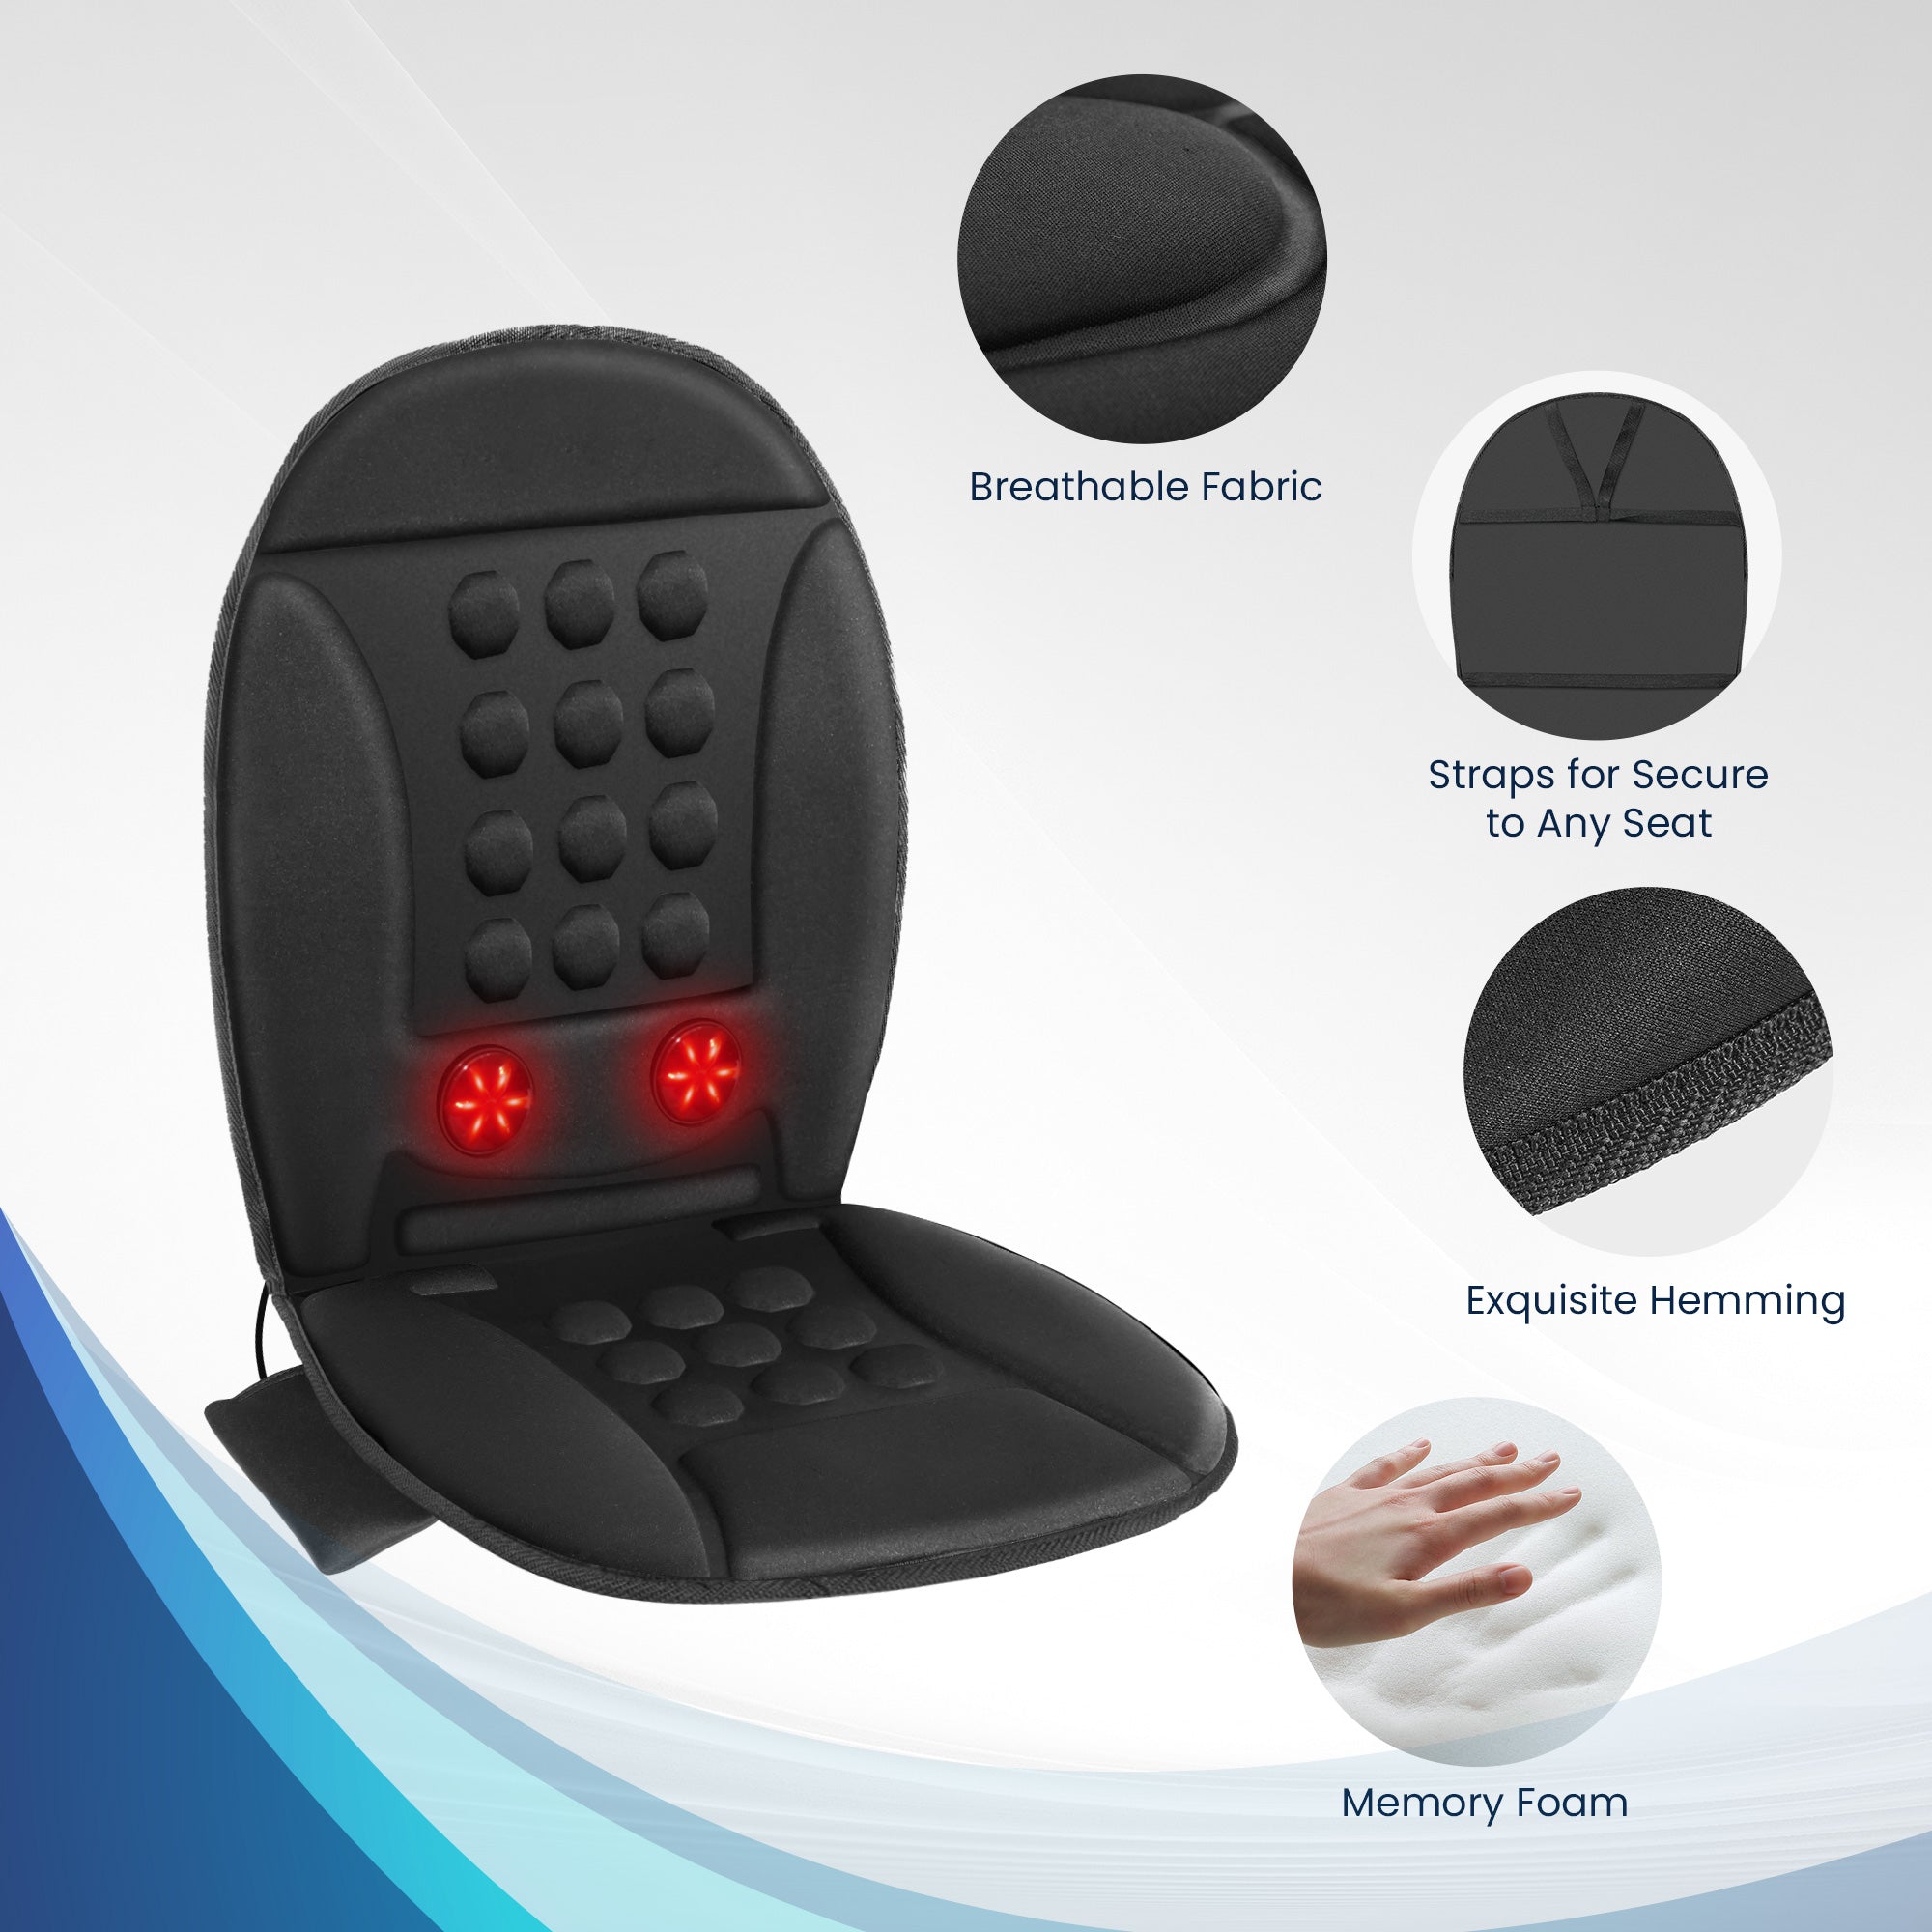 COMFIER Massage Seat Cushion with Heat, Vibration Back Massager for Chair, Seat Warmer Massager, Gifts for Women Men CF-2003